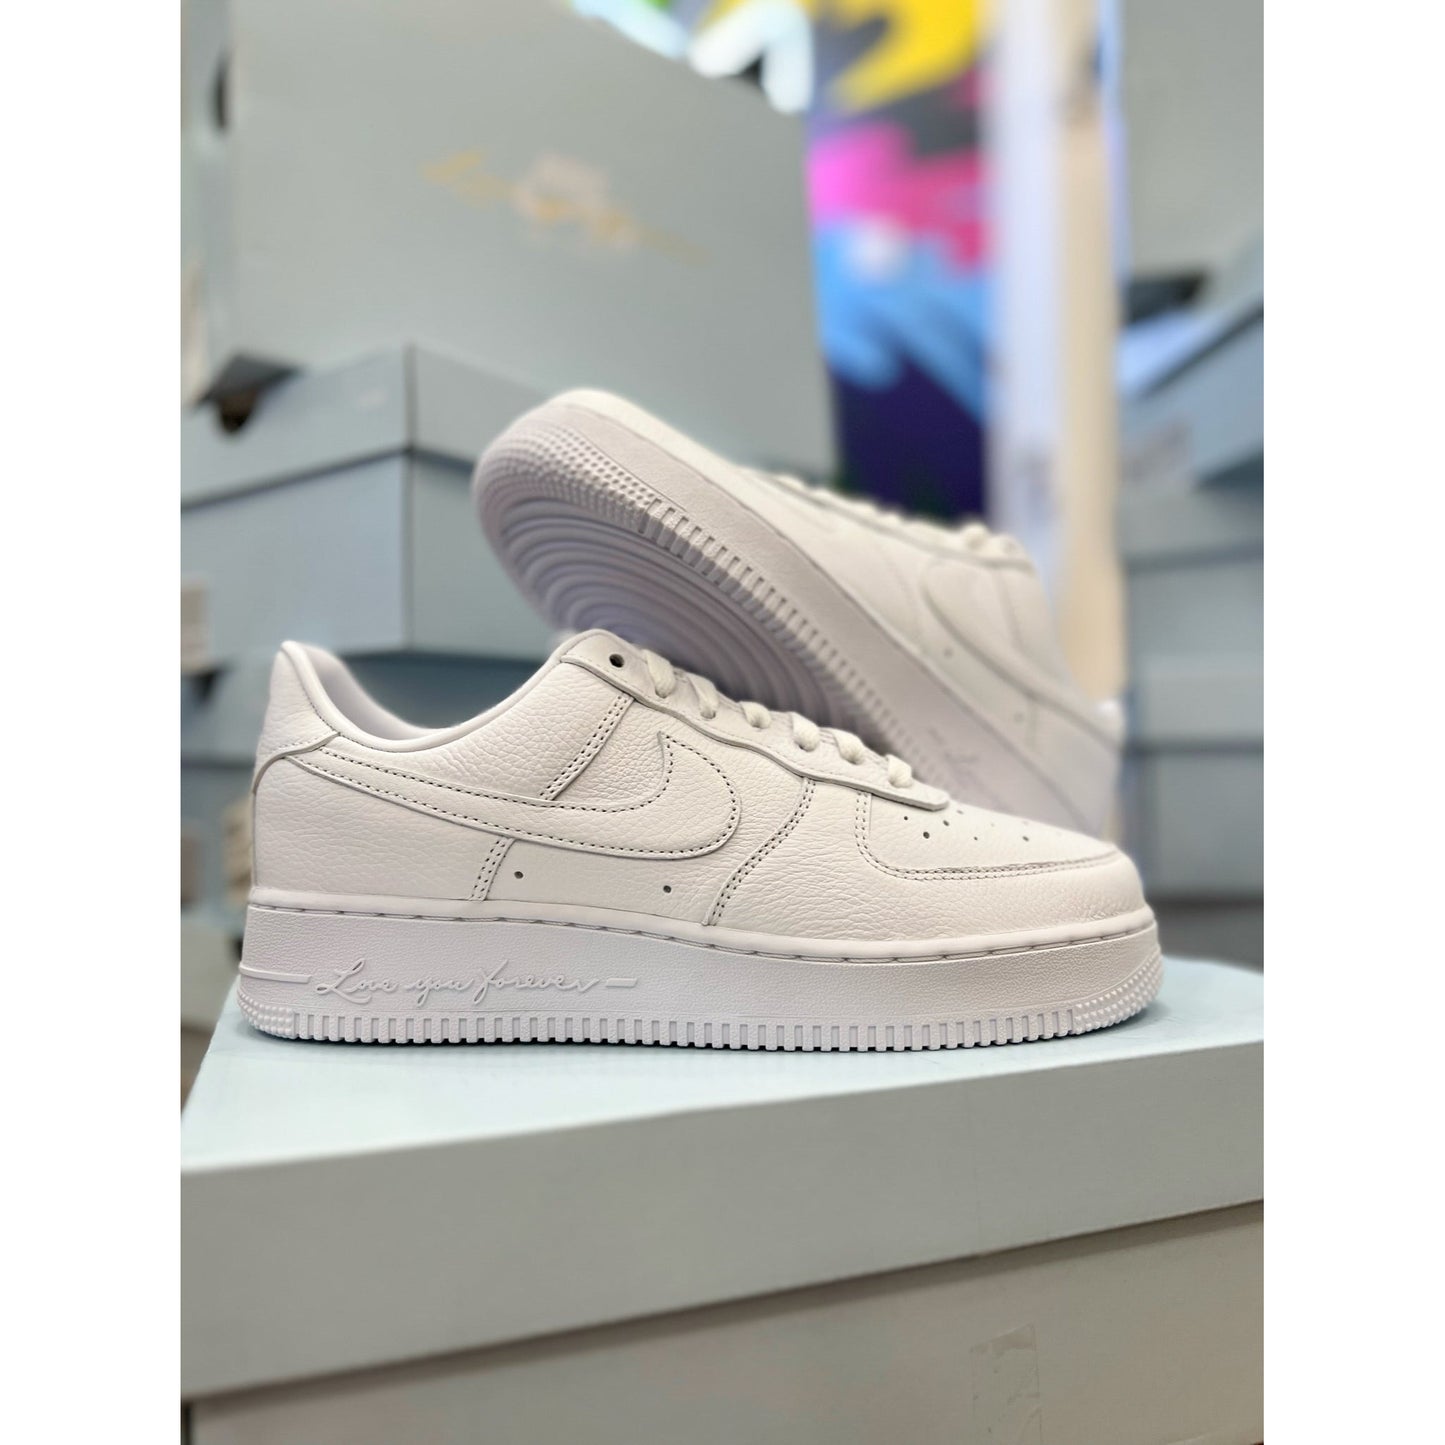 Nike Air Force 1 Low Drake NOCTA Certified Lover Boy from Nike